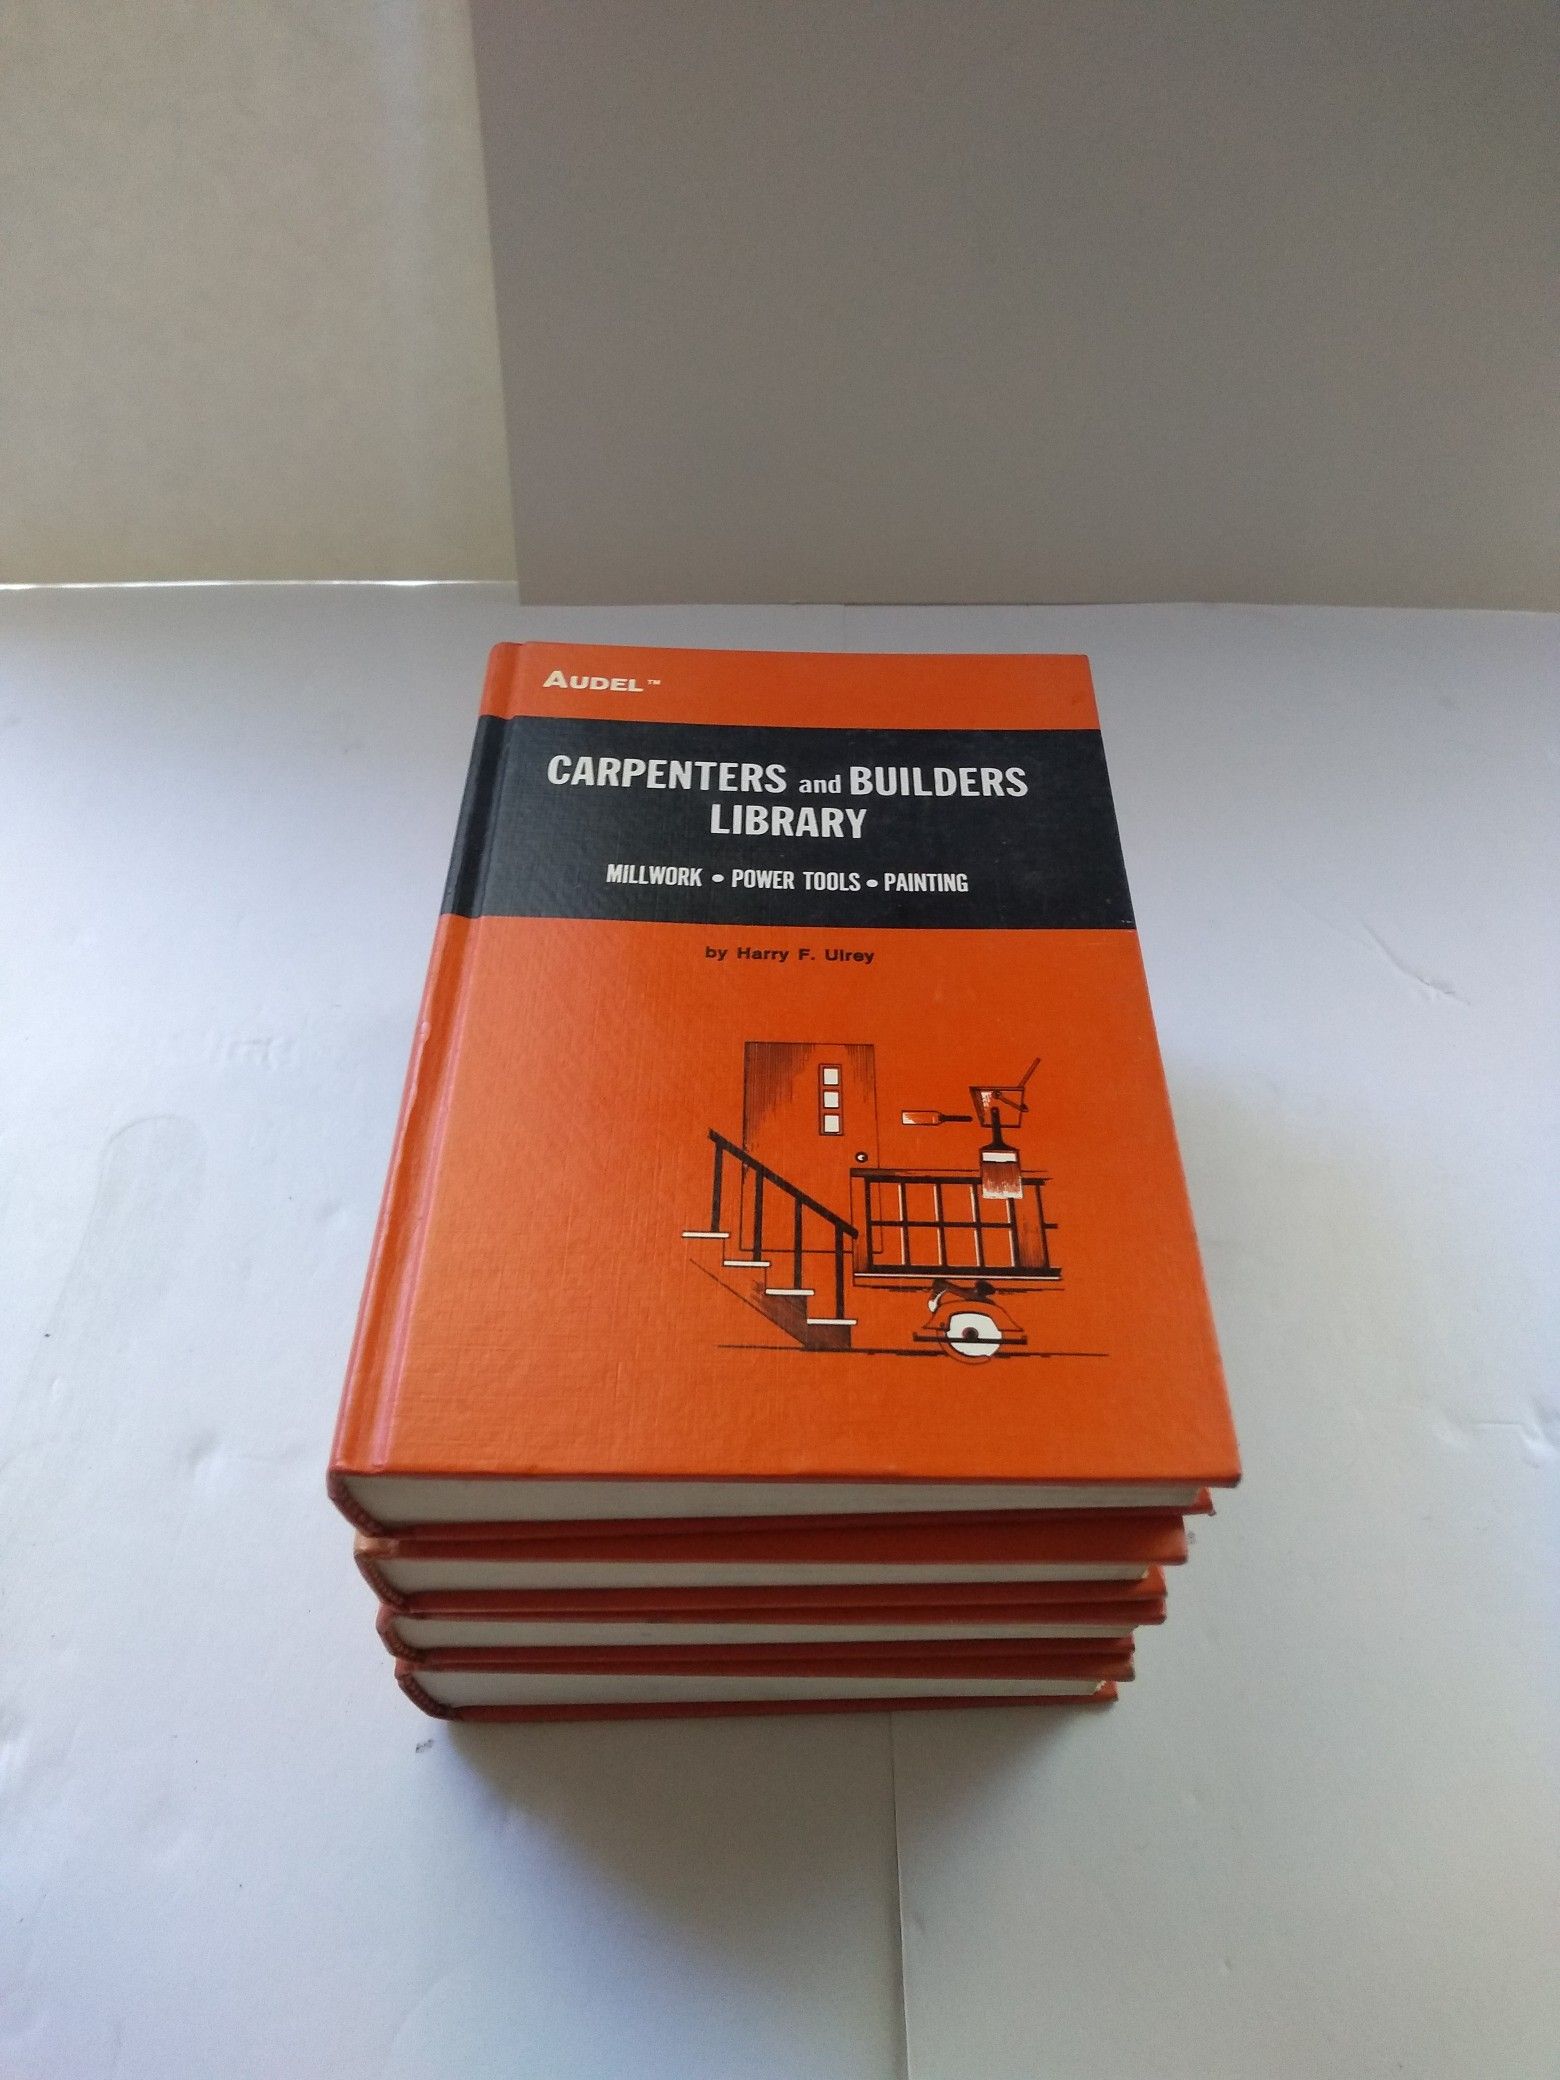 Vintage Carpenter's and Builders Library 1970 Hardcover Books